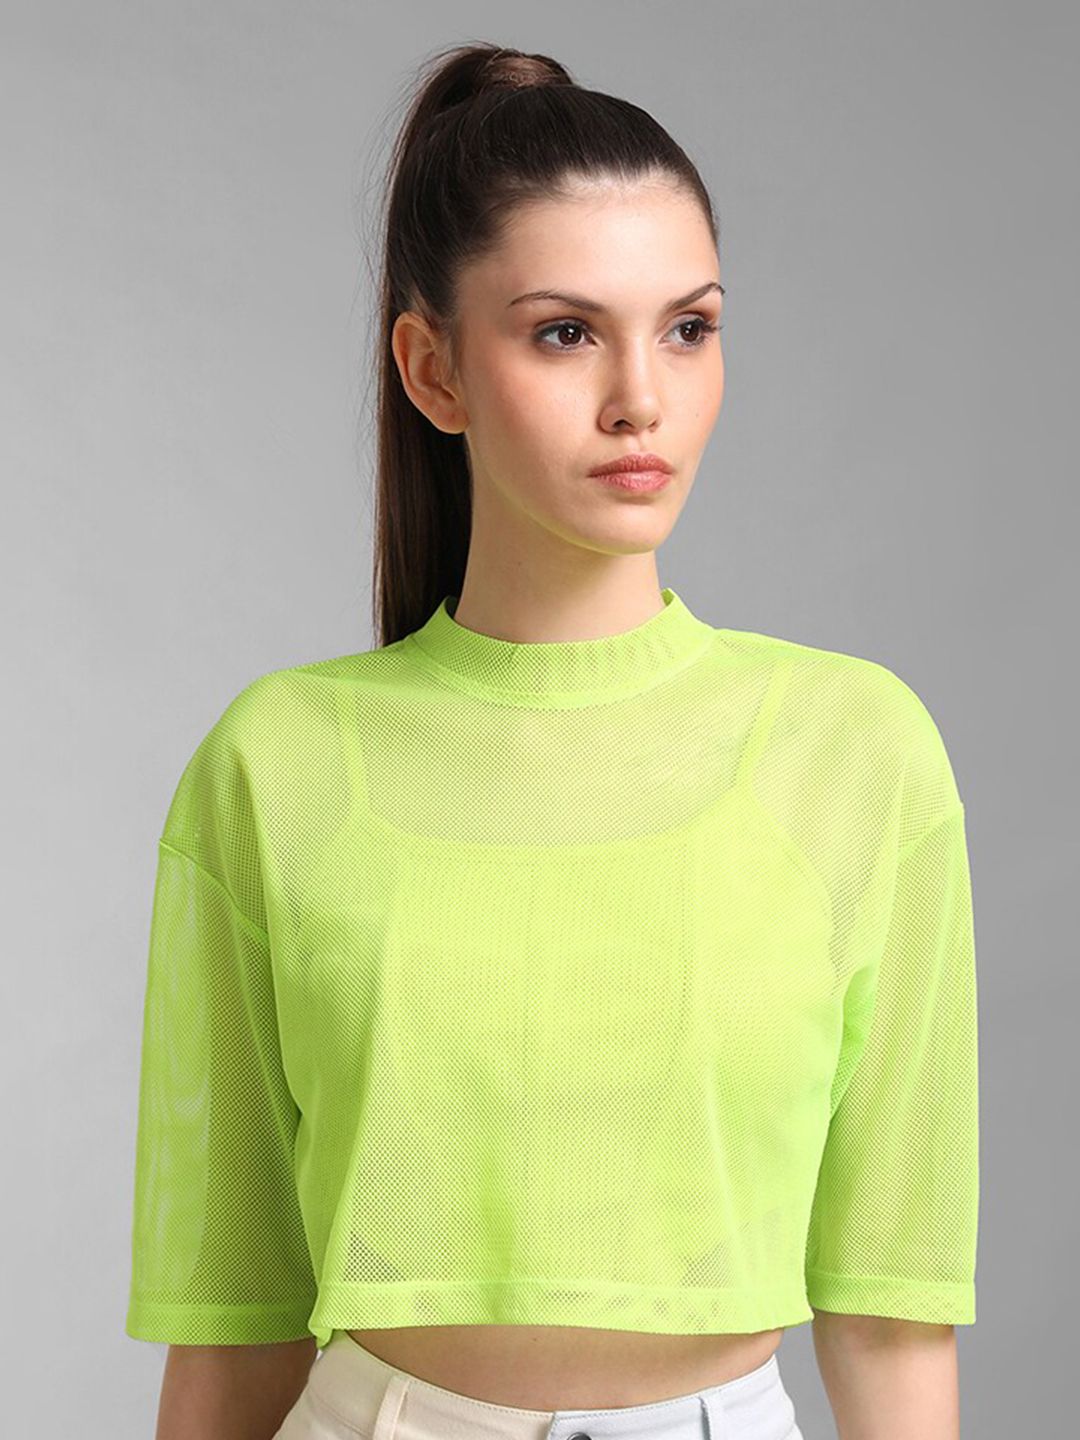 Kazo Fluorescent Green Crop Boxy Top Price in India